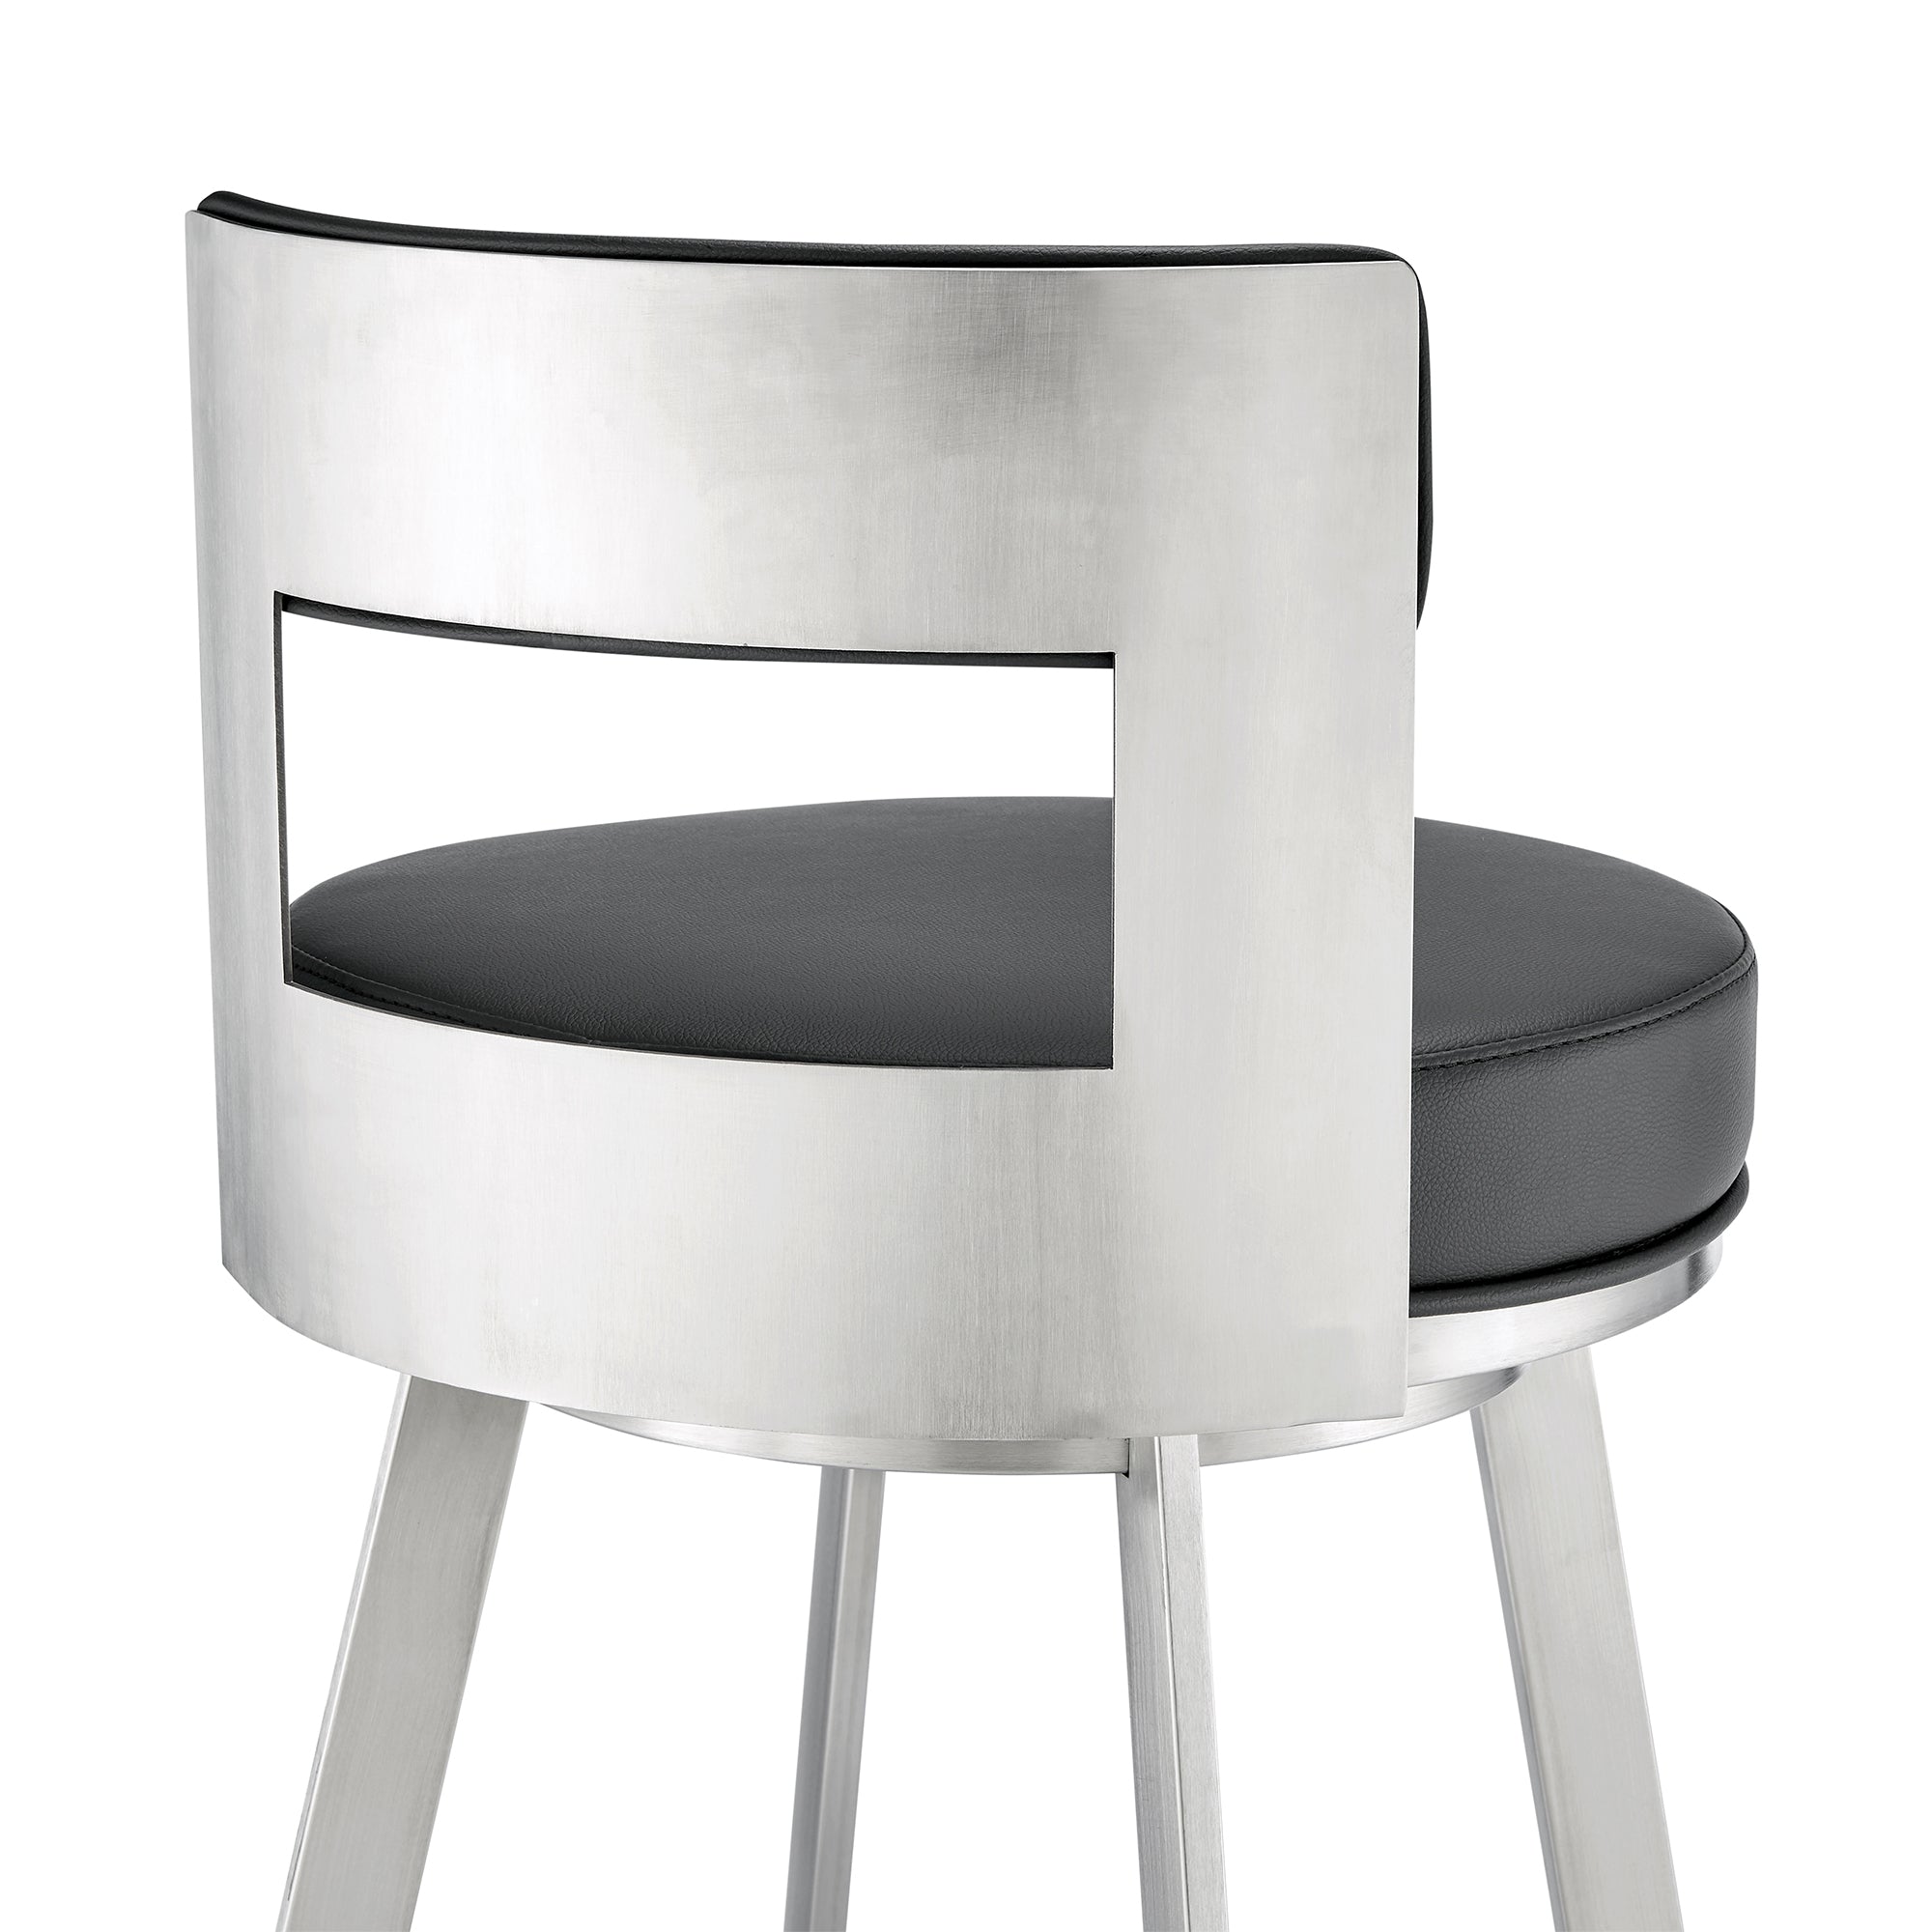 Armen Living - Lynof Swivel Counter or Bar Stool in Faux Leather and Metal - 840254335516